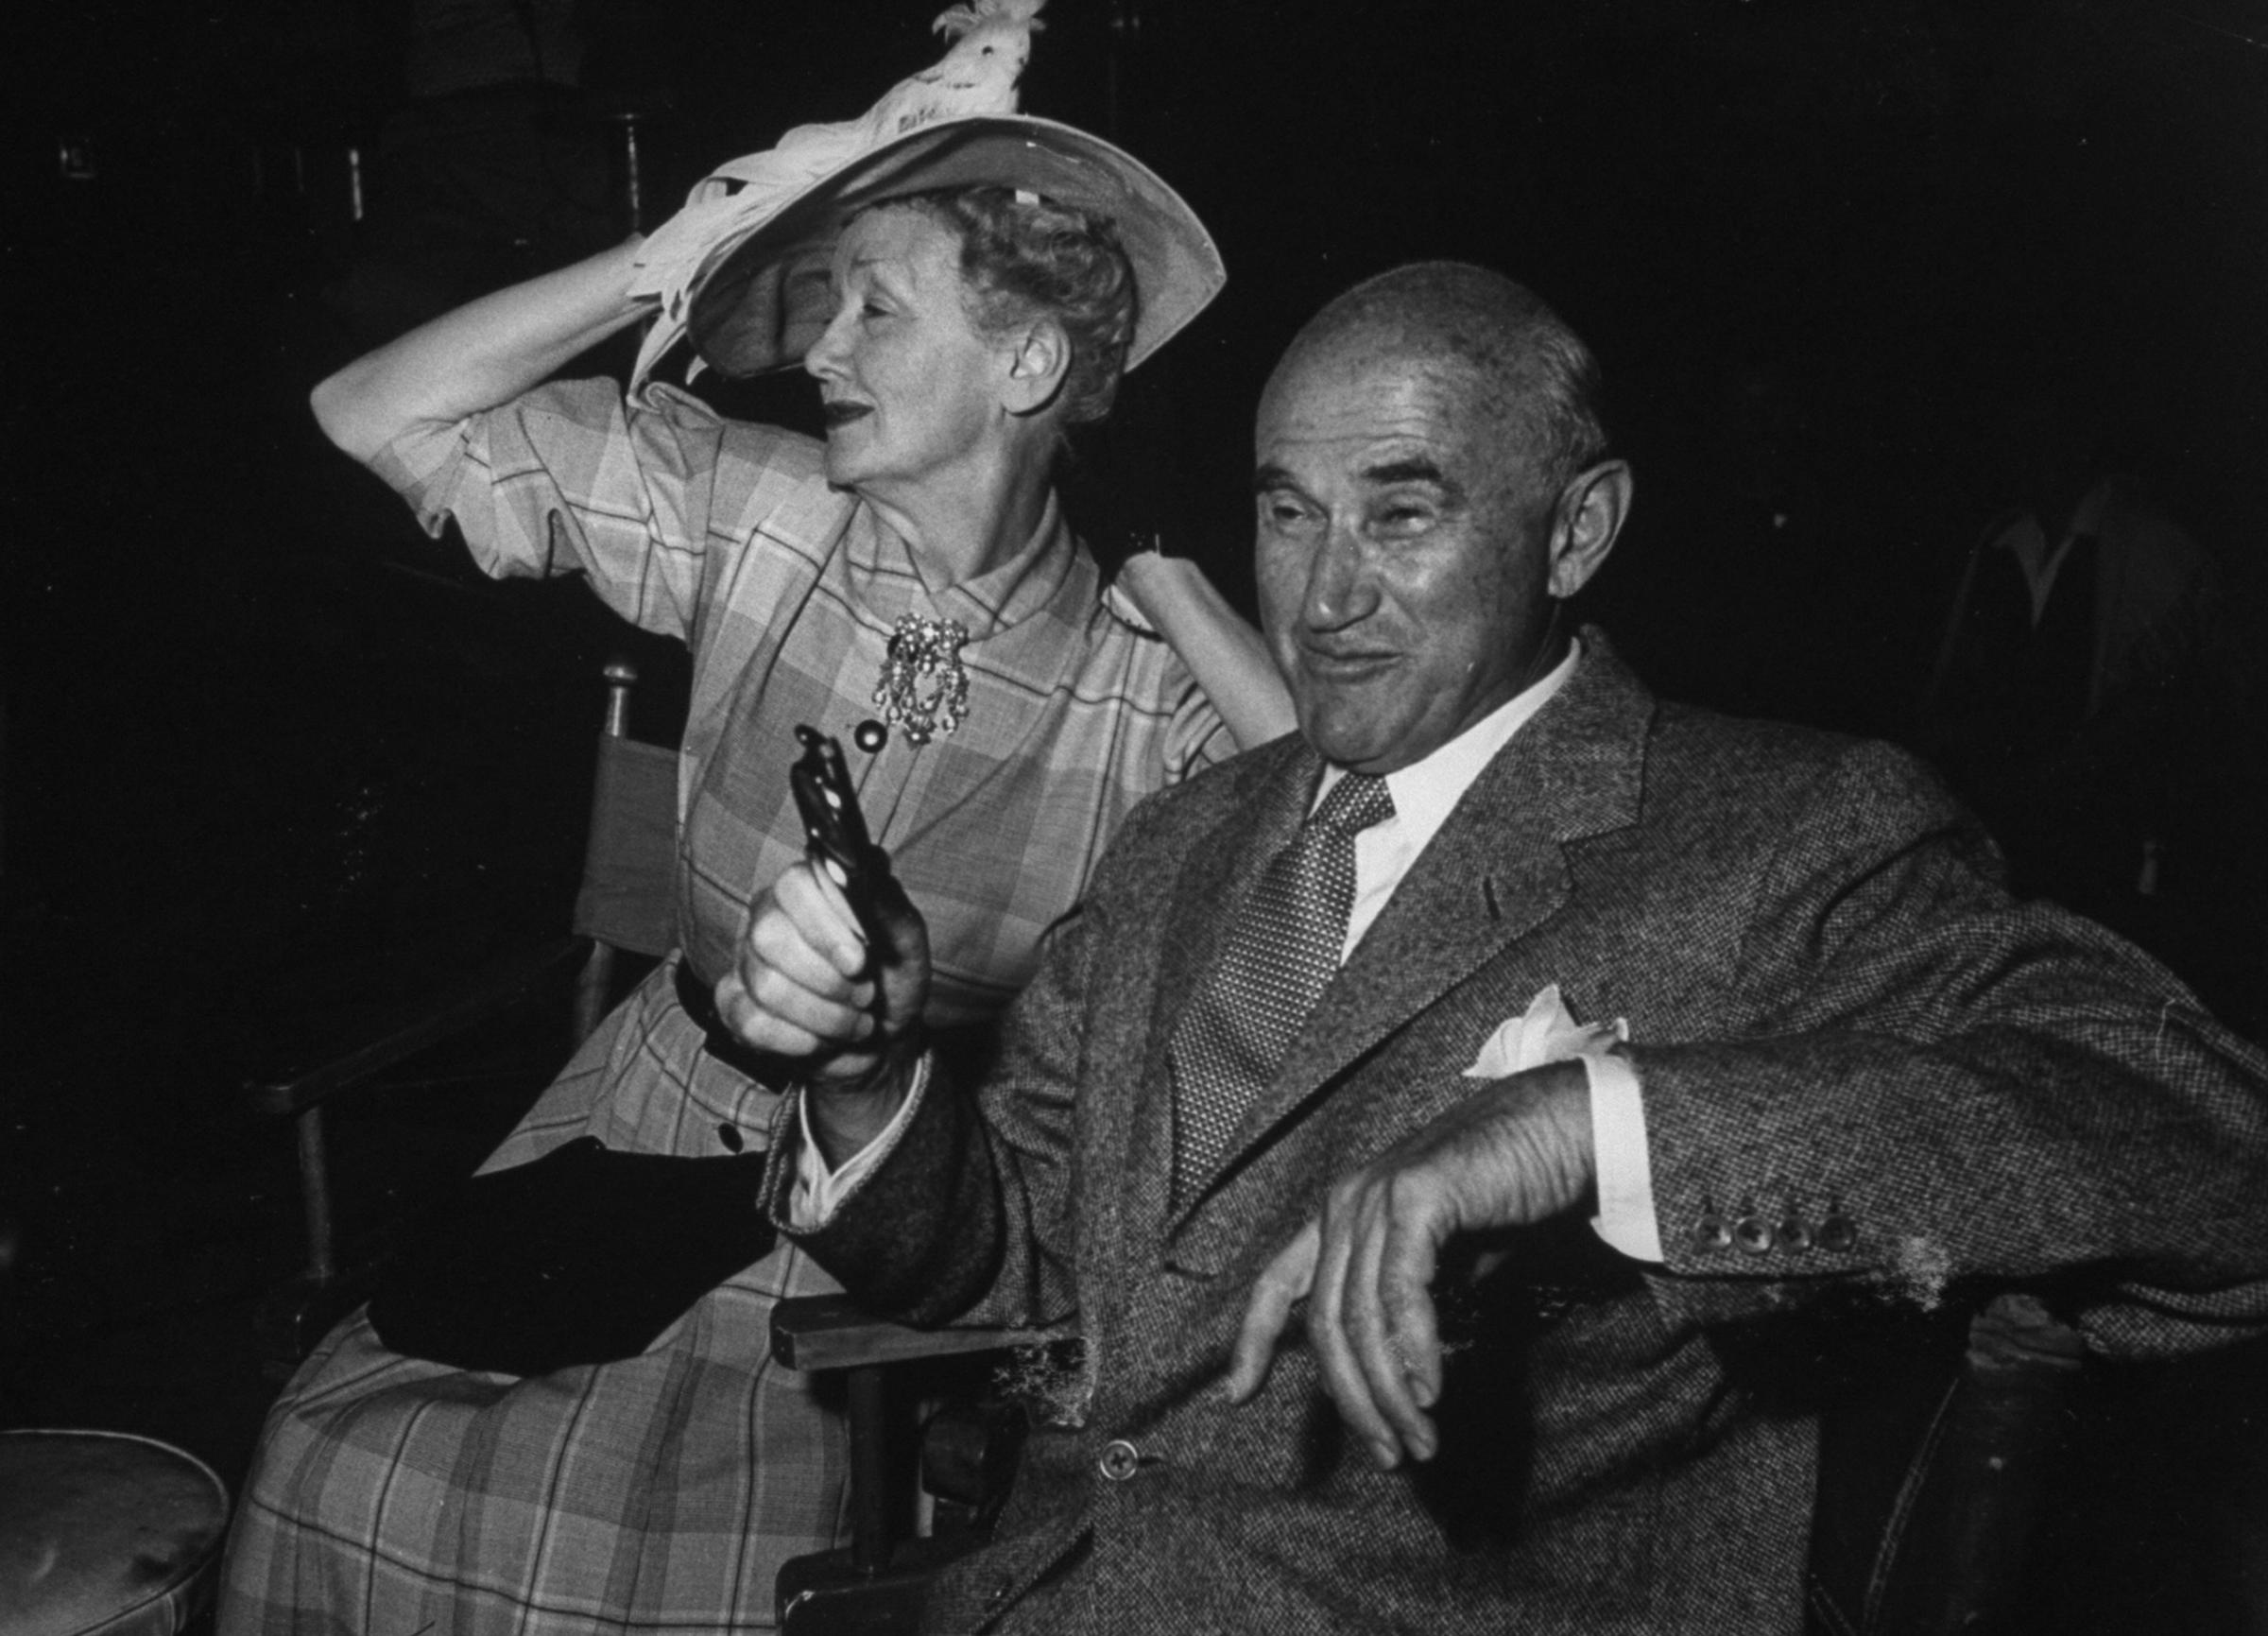 Hedda Hopper and Sam Goldwyn on the set during production of MGM's "Porgy and Bess." 1958.